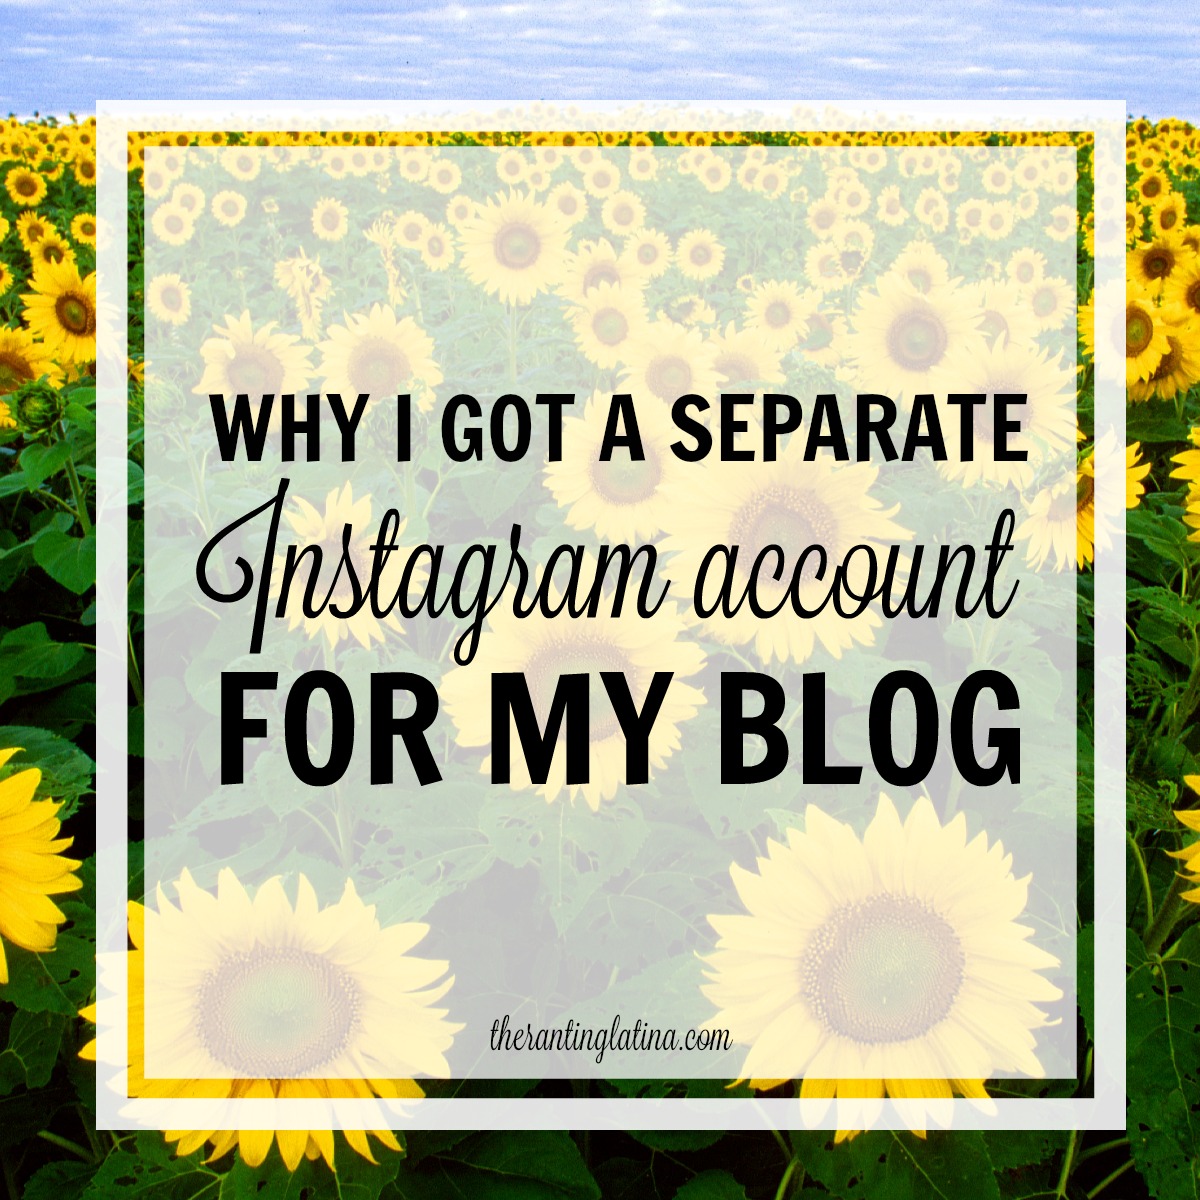 Creating a separate Instagram account for your blog is very important! You should consider separating your personal IG account from your blog's.